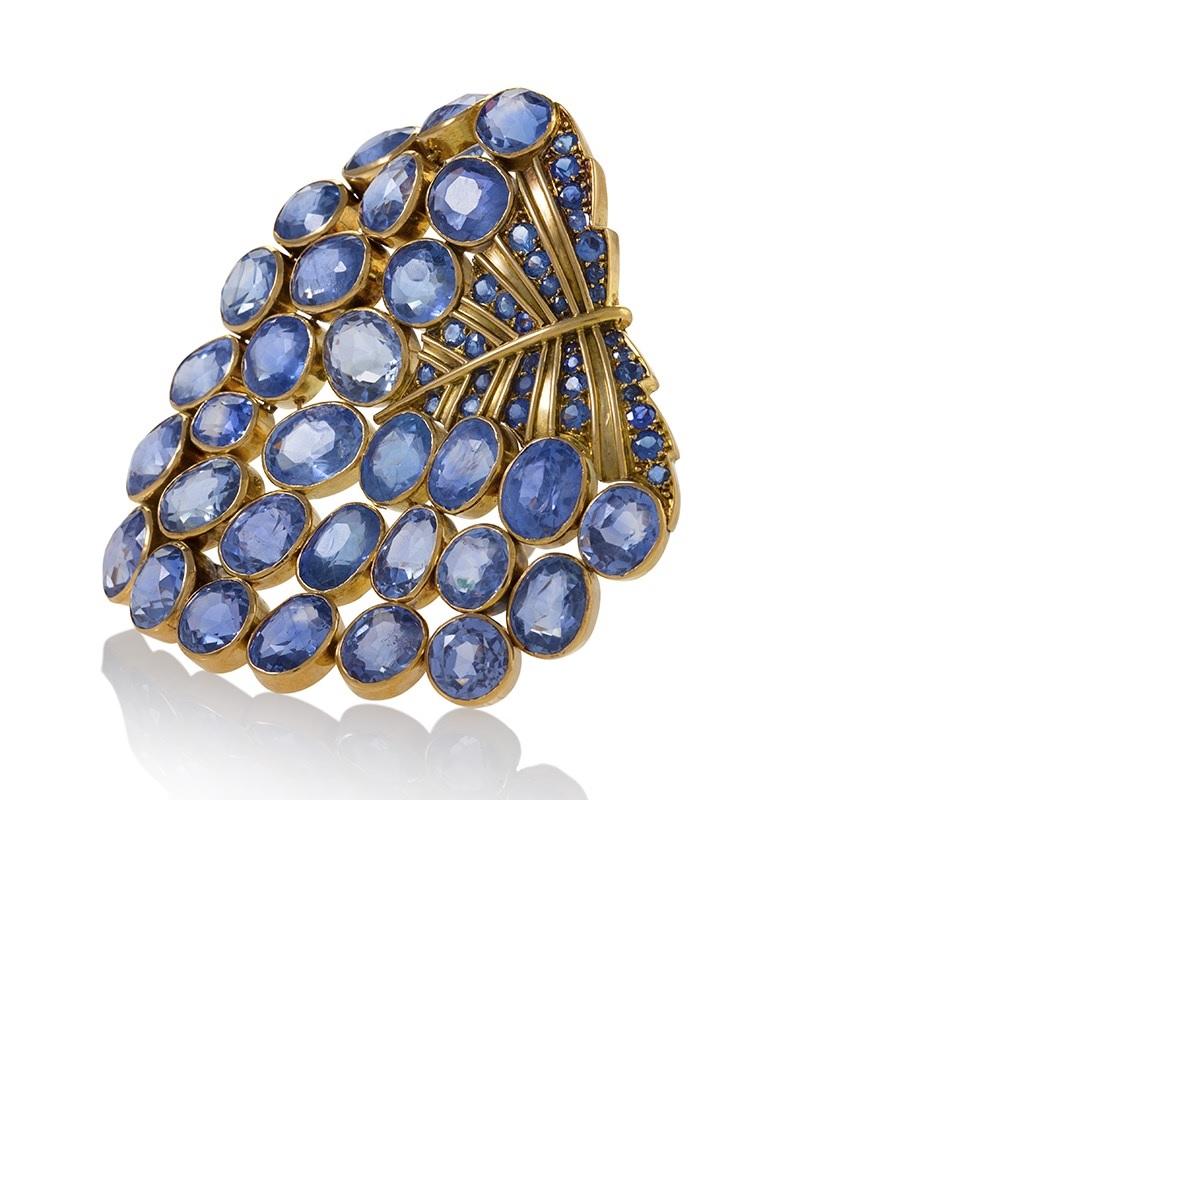 In the 1930s, the creative women at the House of René Boivin returned to naturalistic themes—like this blue sapphire 